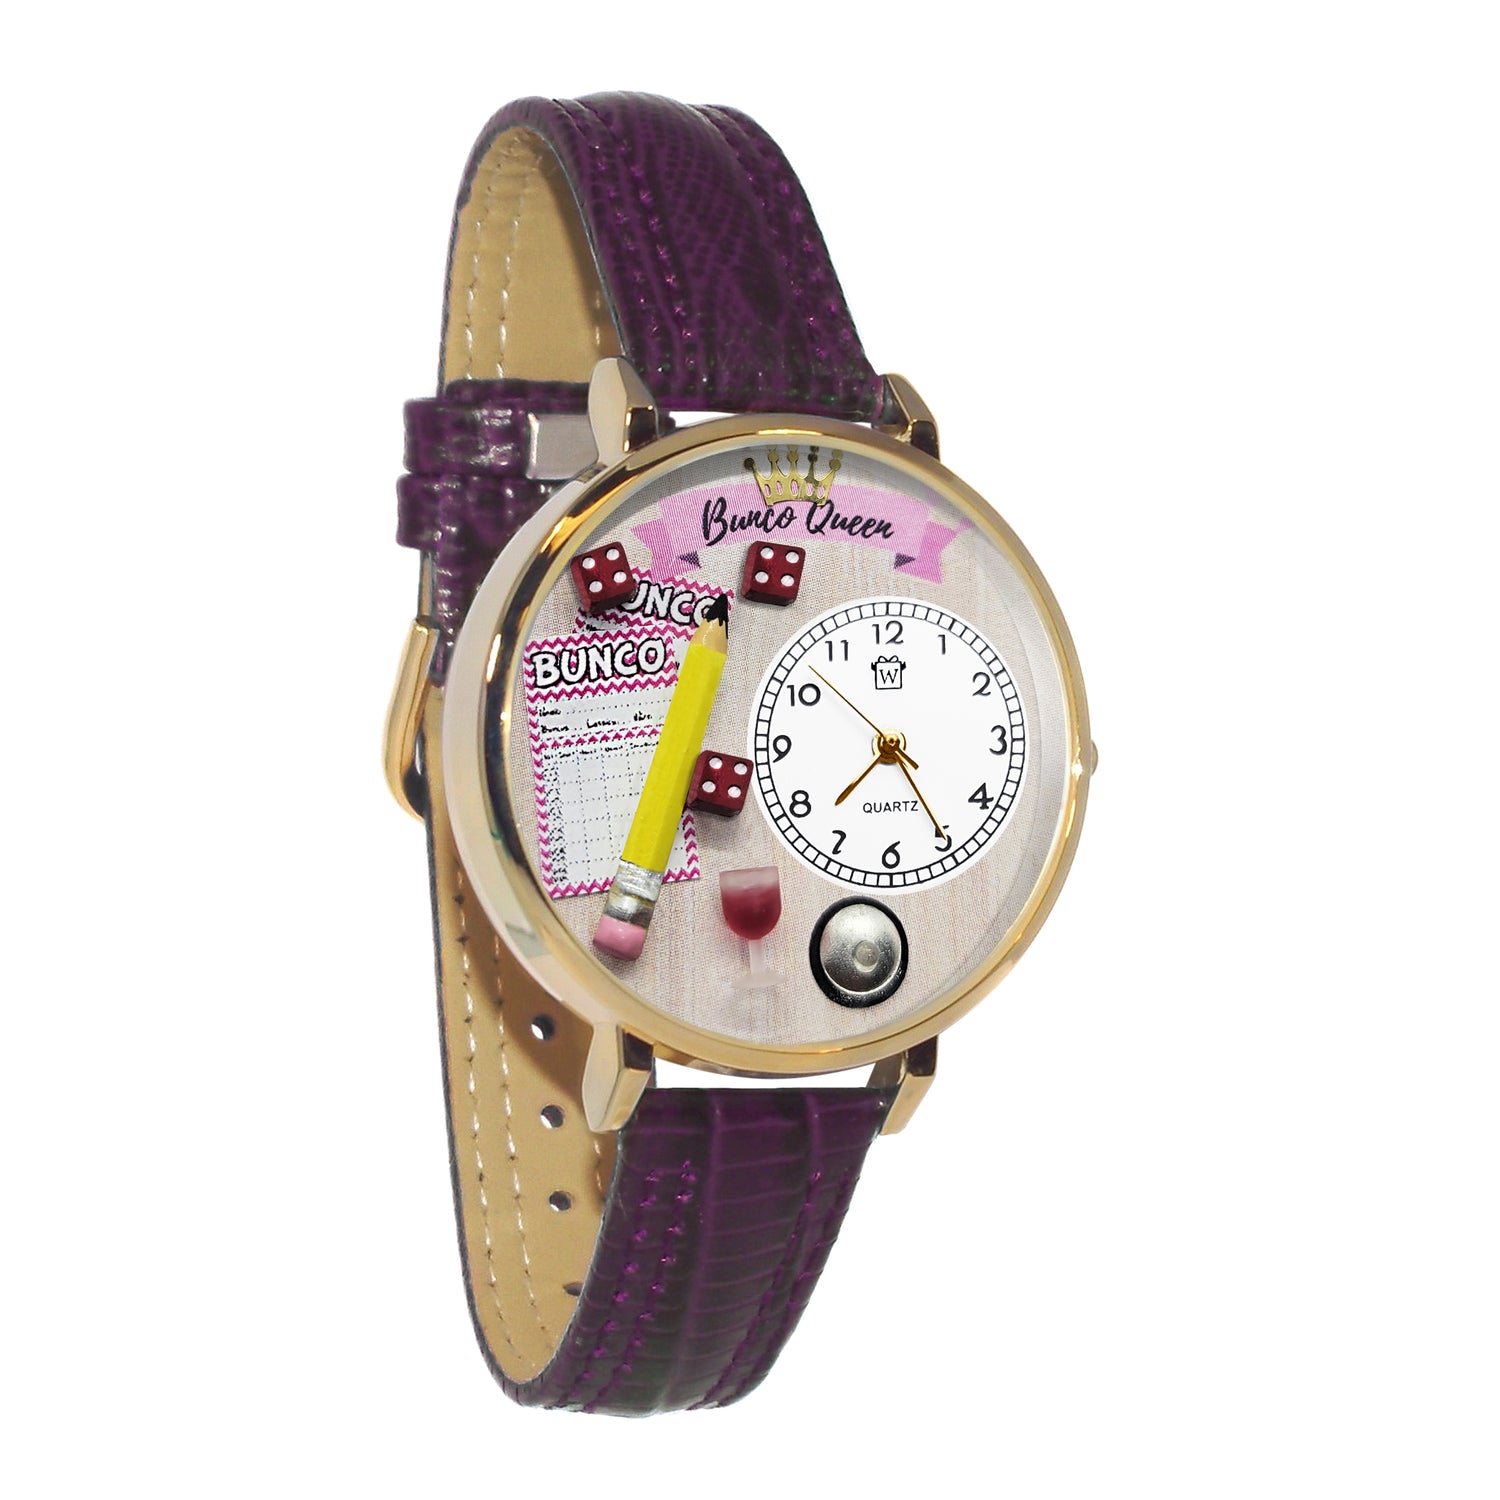 Whimsical Gifts | Bunco Queen 3D Watch Large Style | Handmade in USA | Hobbies & Special Interests | Casino | Gaming | Game Night | Novelty Unique Fun Miniatures Gift | Gold Finish Purple Leather Watch Band